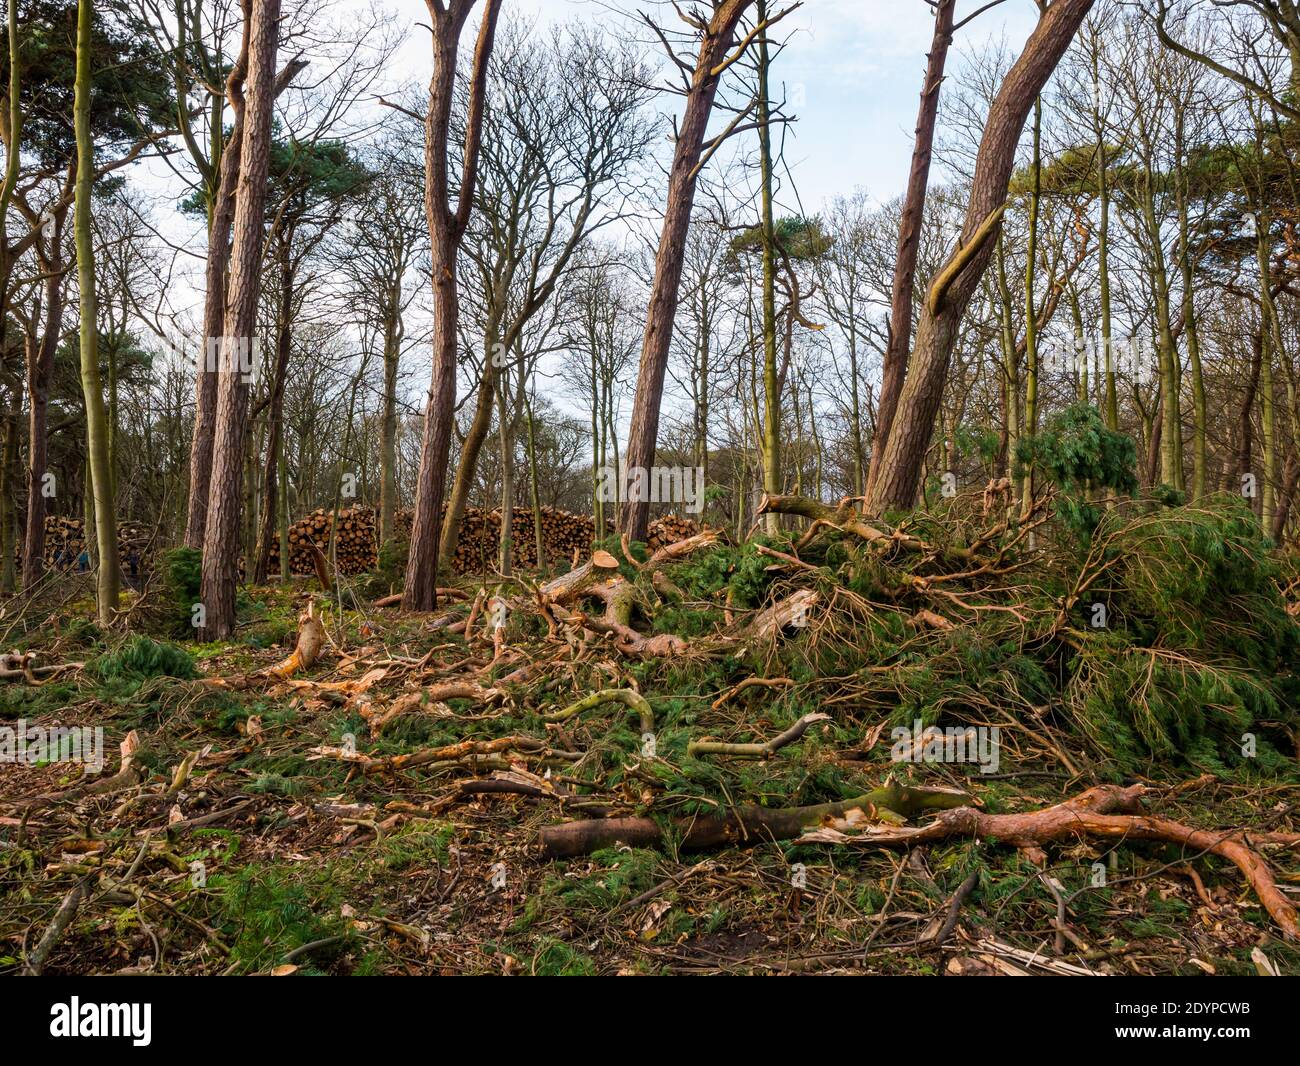 Forestry work and tree felling or clearing in woodland, East Lothian, Scotland, UK Stock Photo